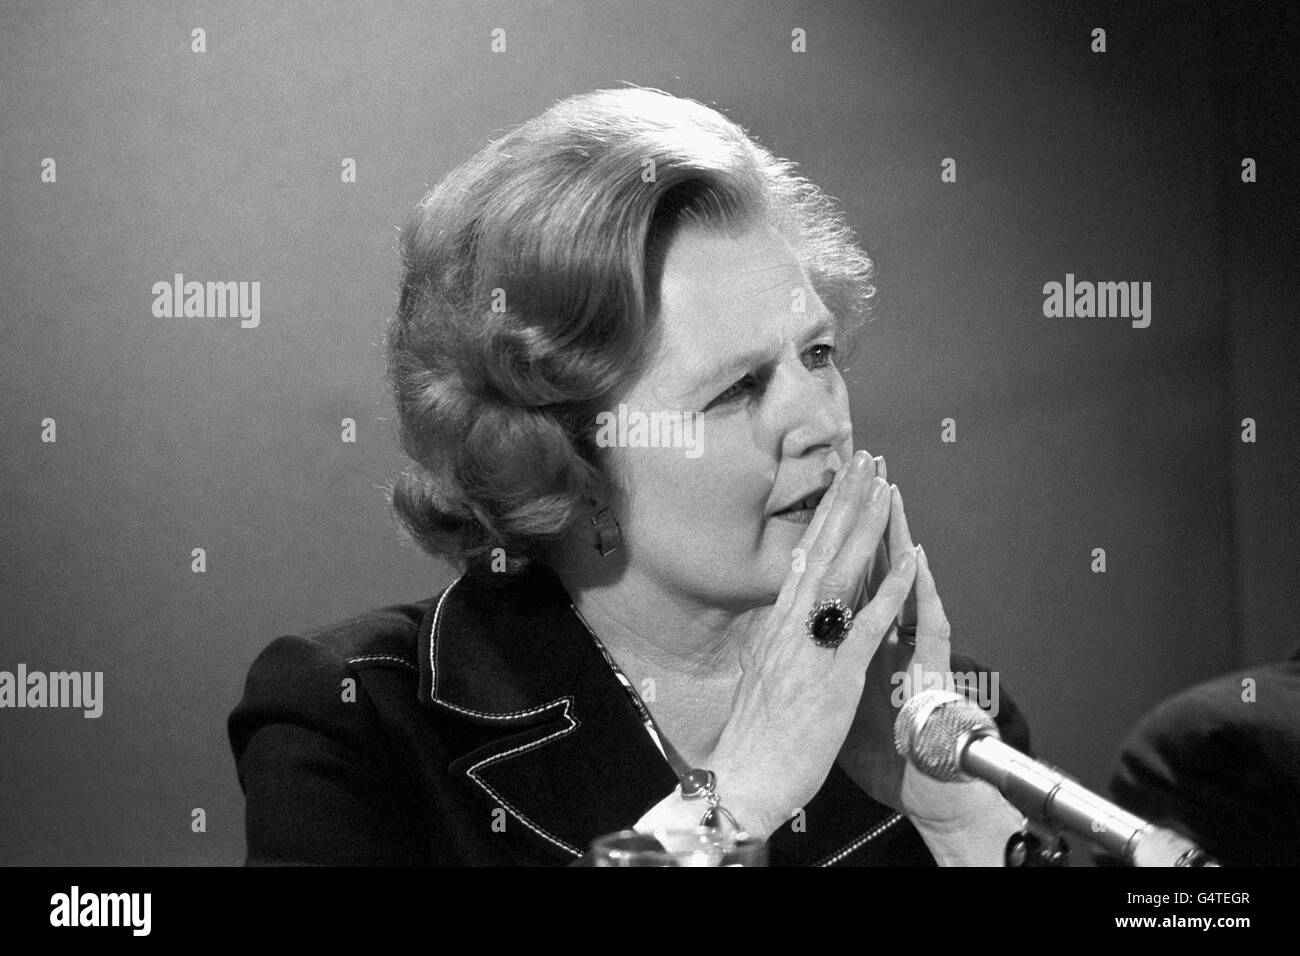 Conservative leader Margaret Thatcher in a thoughtful mood when she hosted her party's press conference in London, as the 1979 General Election campaign entered its final week. Stock Photo